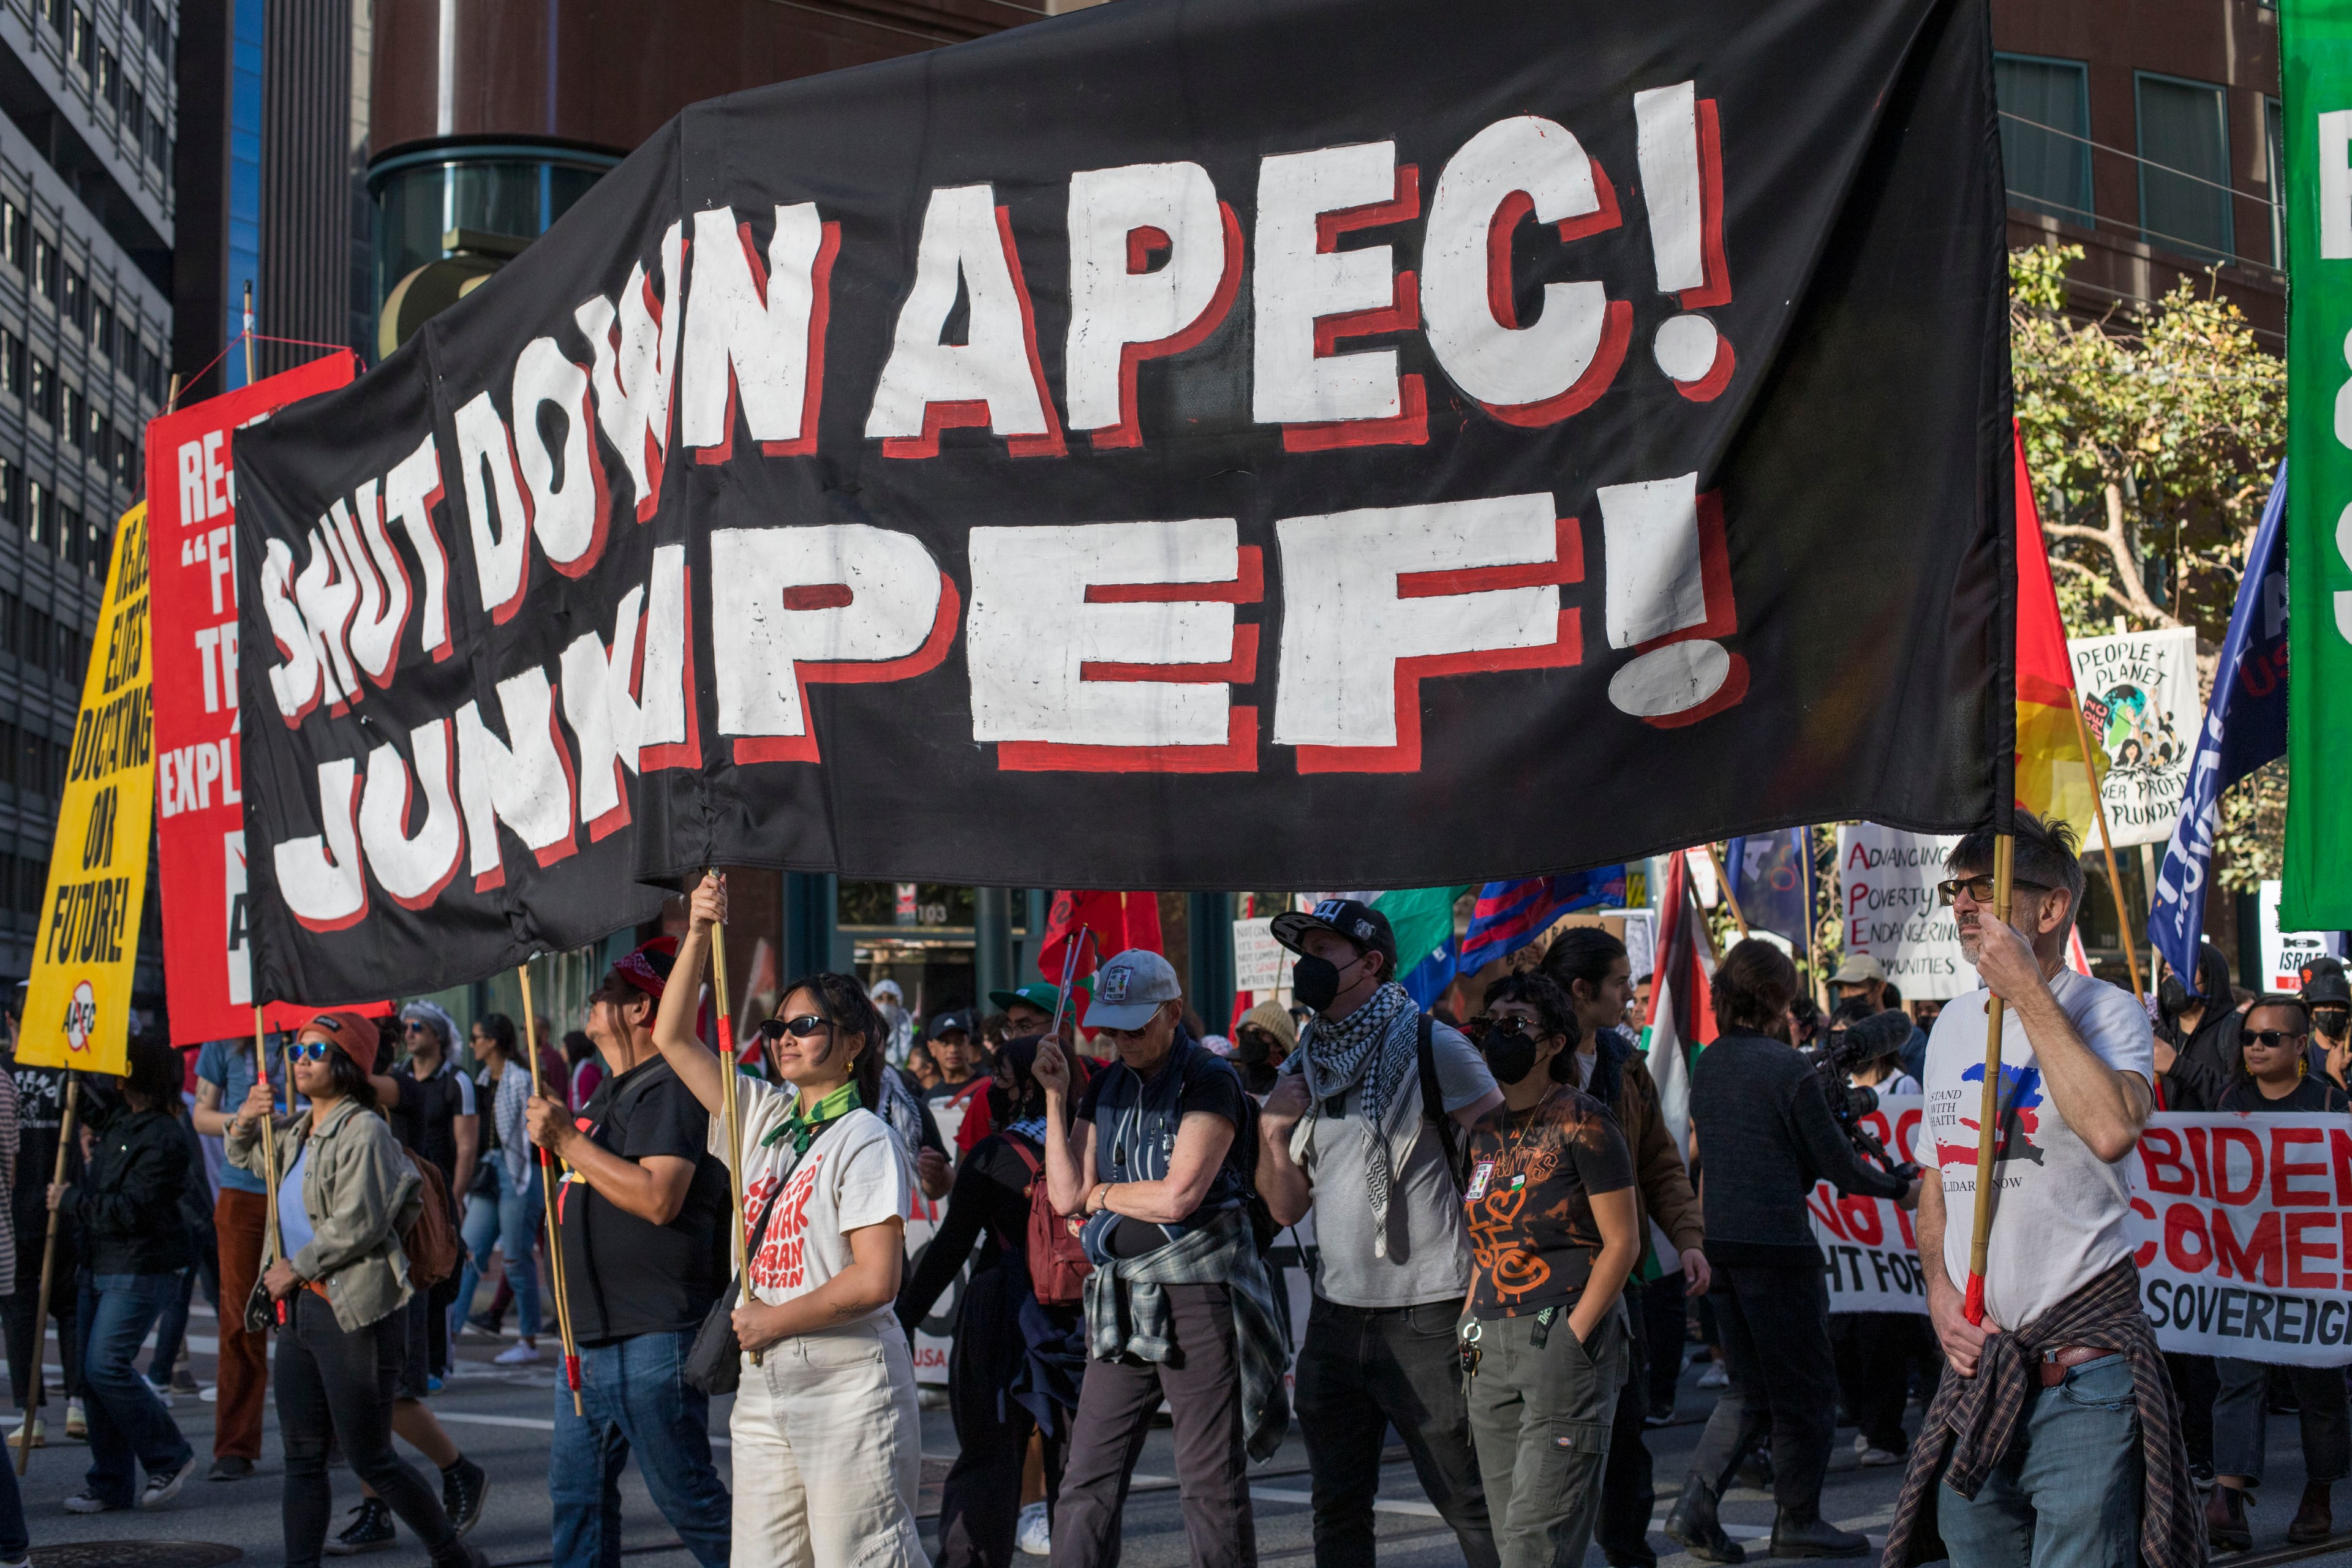 A banner carried by individuals that say "Shut down APEC! Junk IPEF".